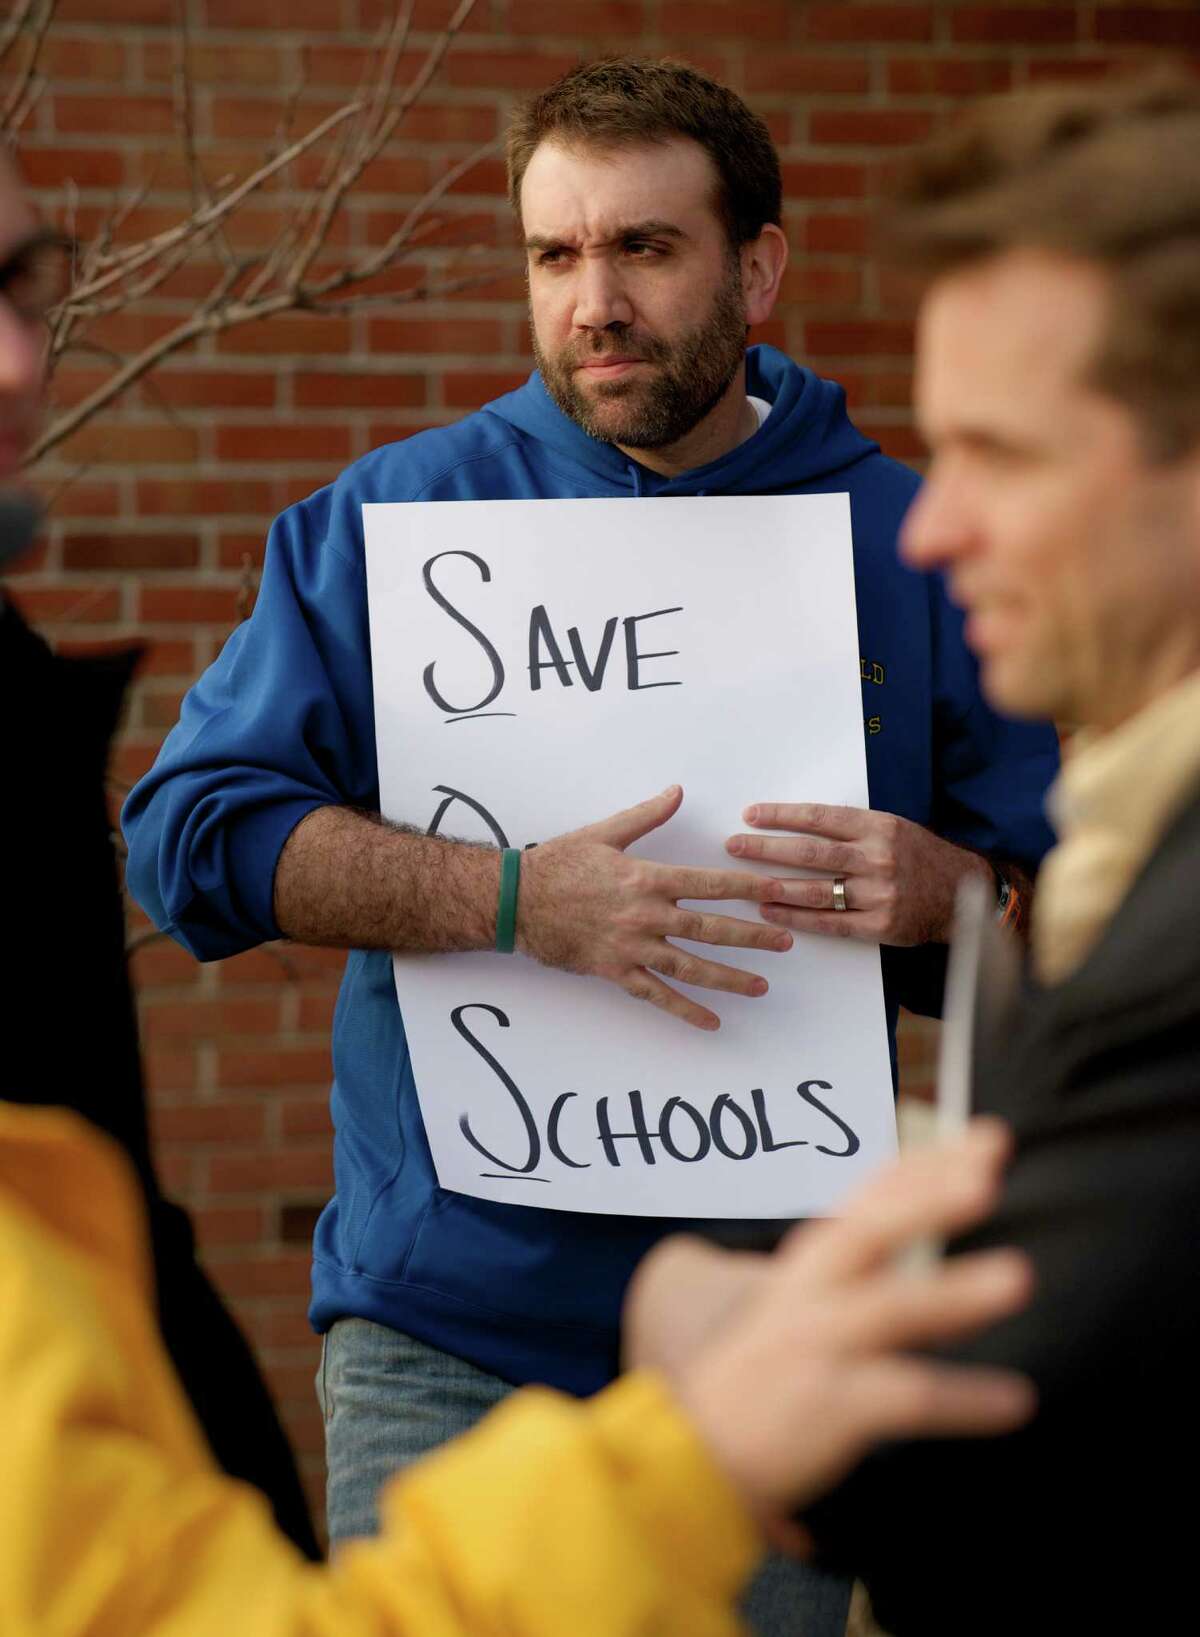 Chris Buckley, 35, of Brookfield, holds a sign asking to "Save Our Schools" during a parents and education staff rally to increase funding for the Brookfield, Conn school system, which was held before the Board of Finance public hearing, at Brookfield High School on Tuesday, April 8, 2014. Buckley has two children who will be students in the Brookfield School System.